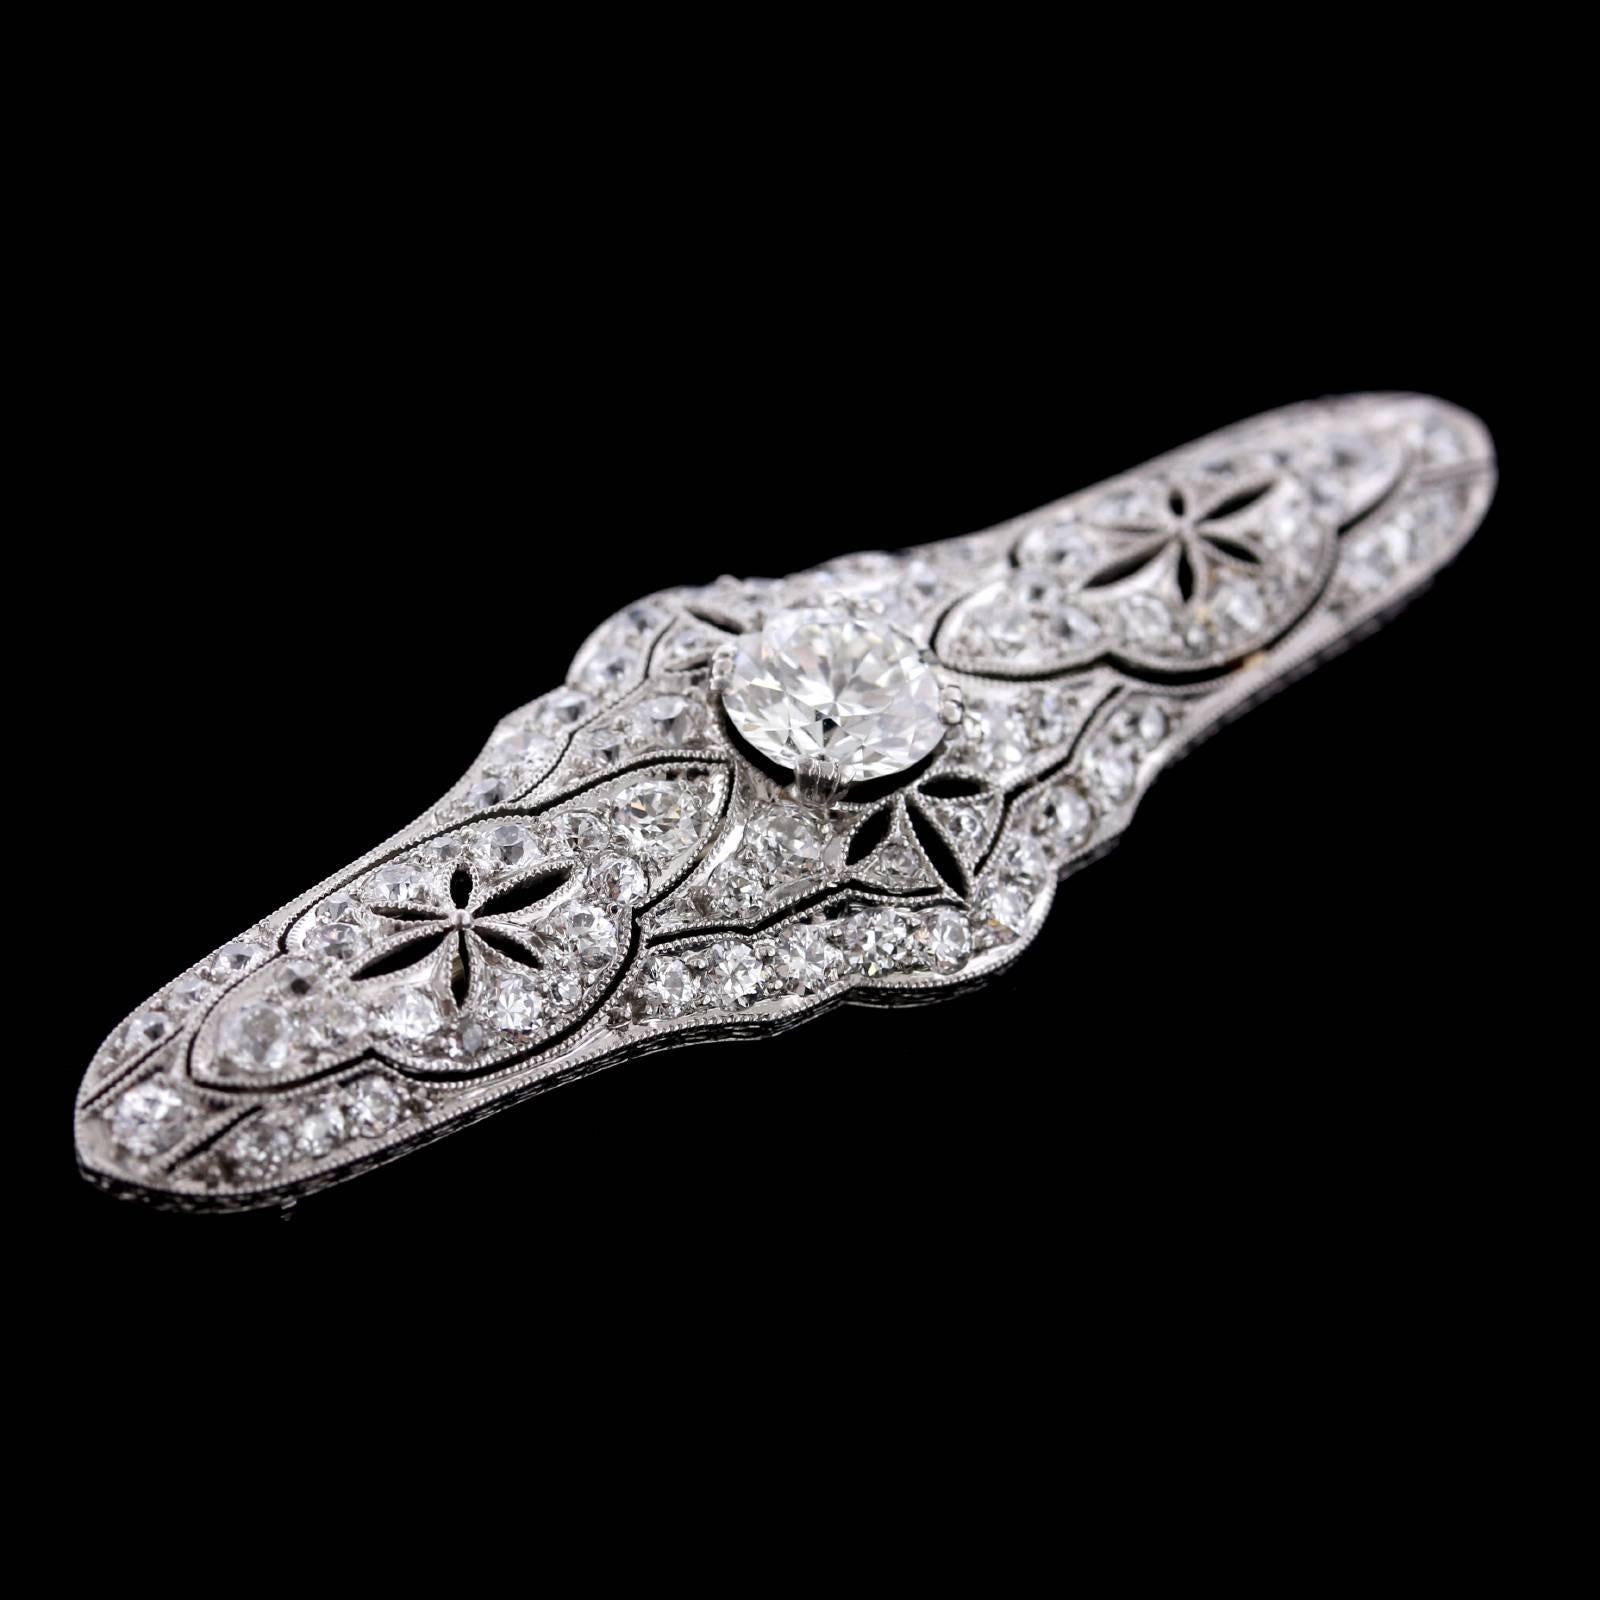 Art Deco Platinum Diamond Bar Pin. The pin is prong set with an old European cut diamond weighing approx. 1.15cts., H color, VS1 clarity, further bead set with 78 old European and old mine cut diamonds, approx. total wt. 1.70cts., HI color, VS2-SI1